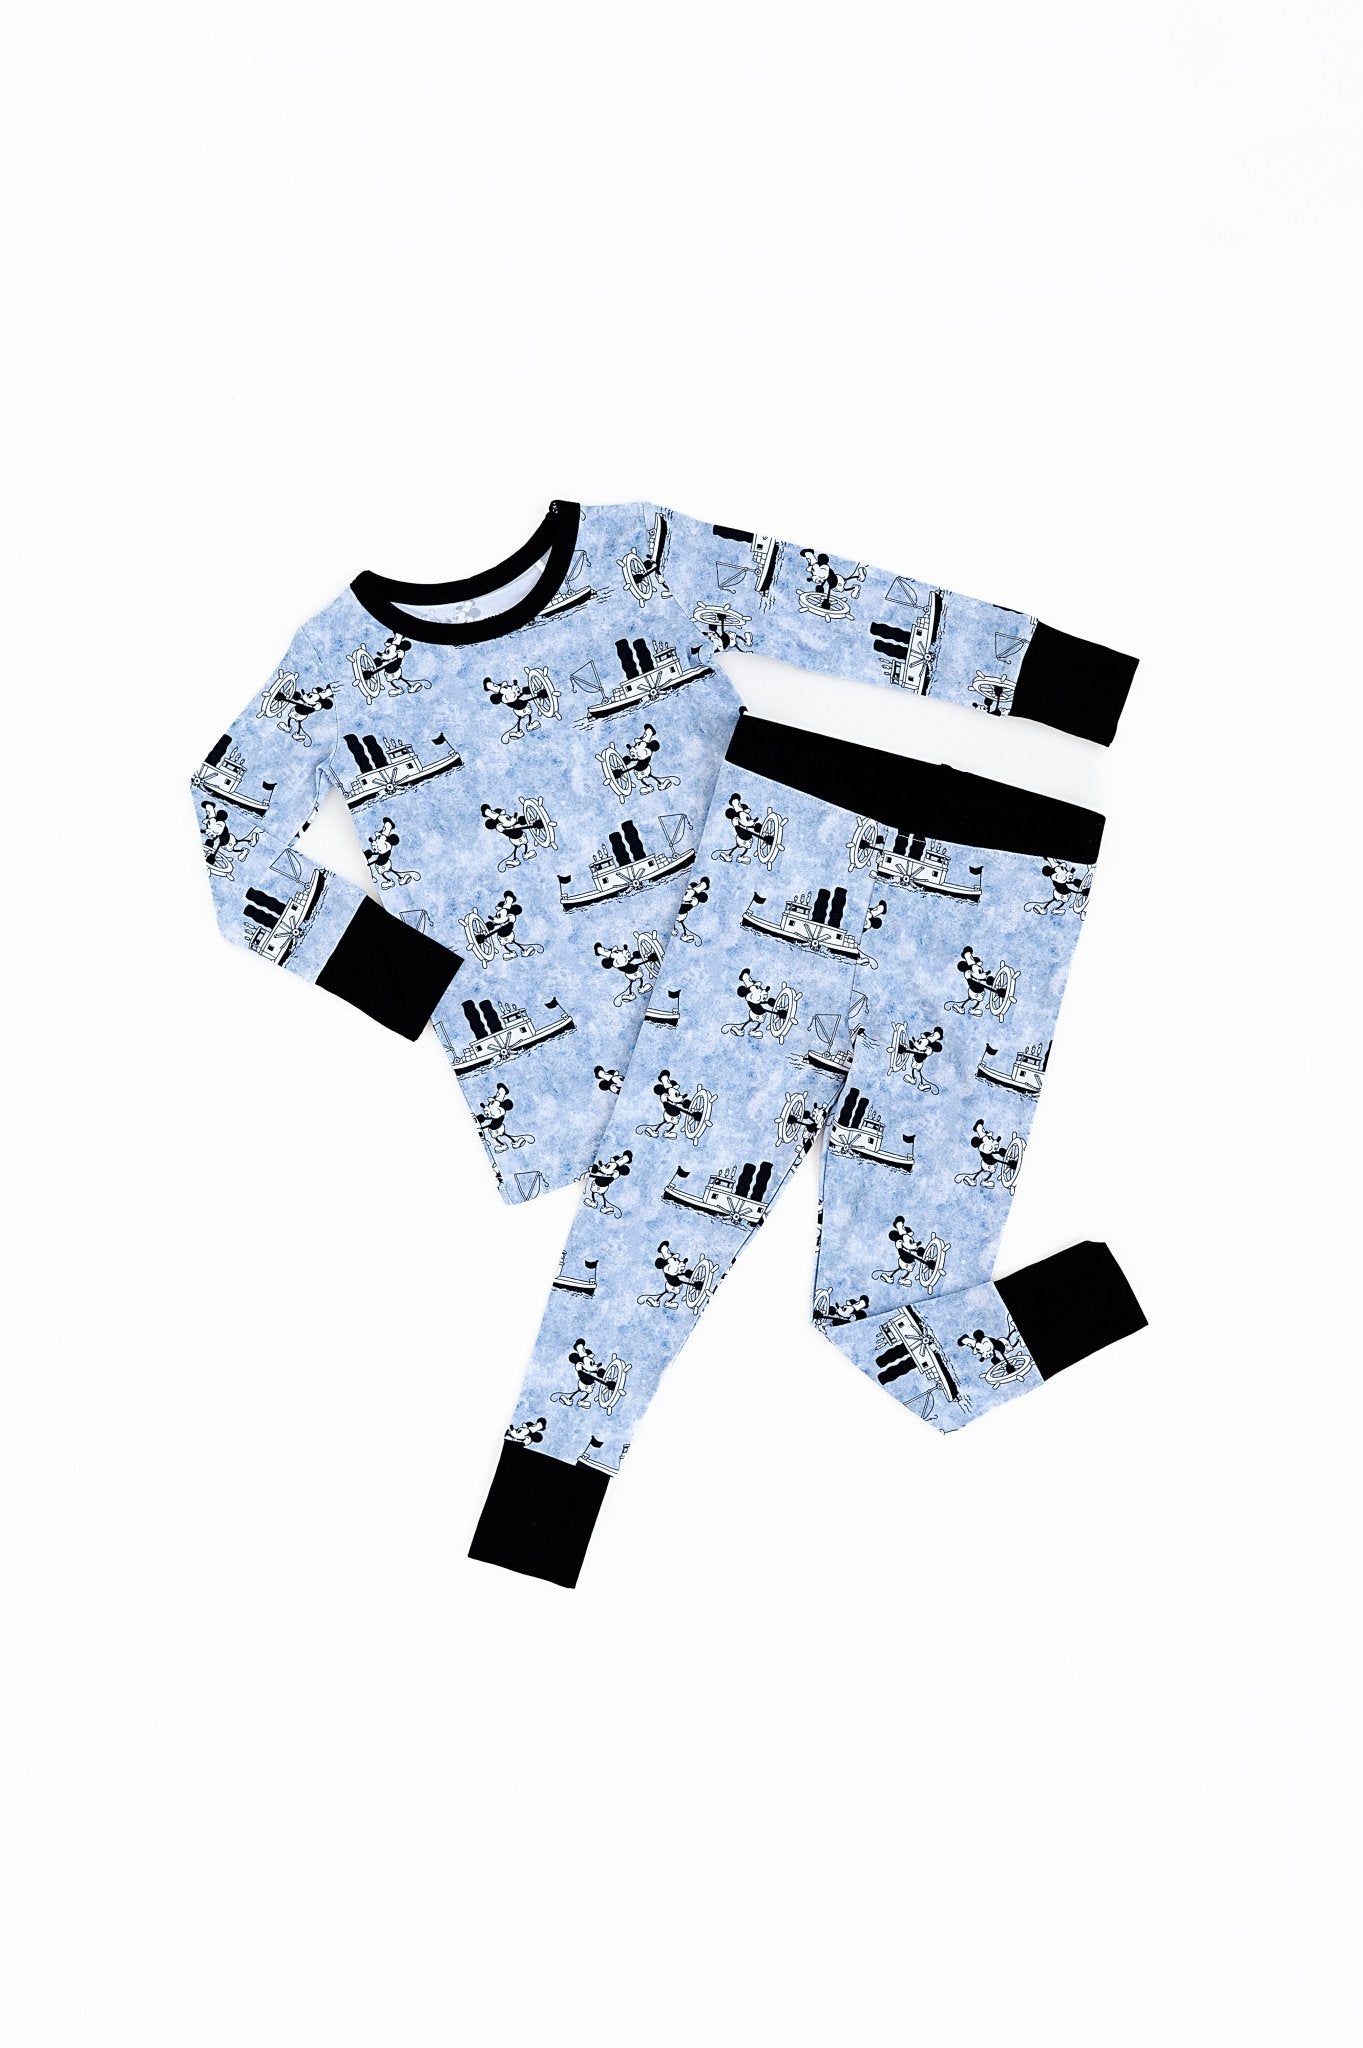 TWO PIECE JAMMIES - STEAMBOAT WILLIE - The Sleepy Sloth